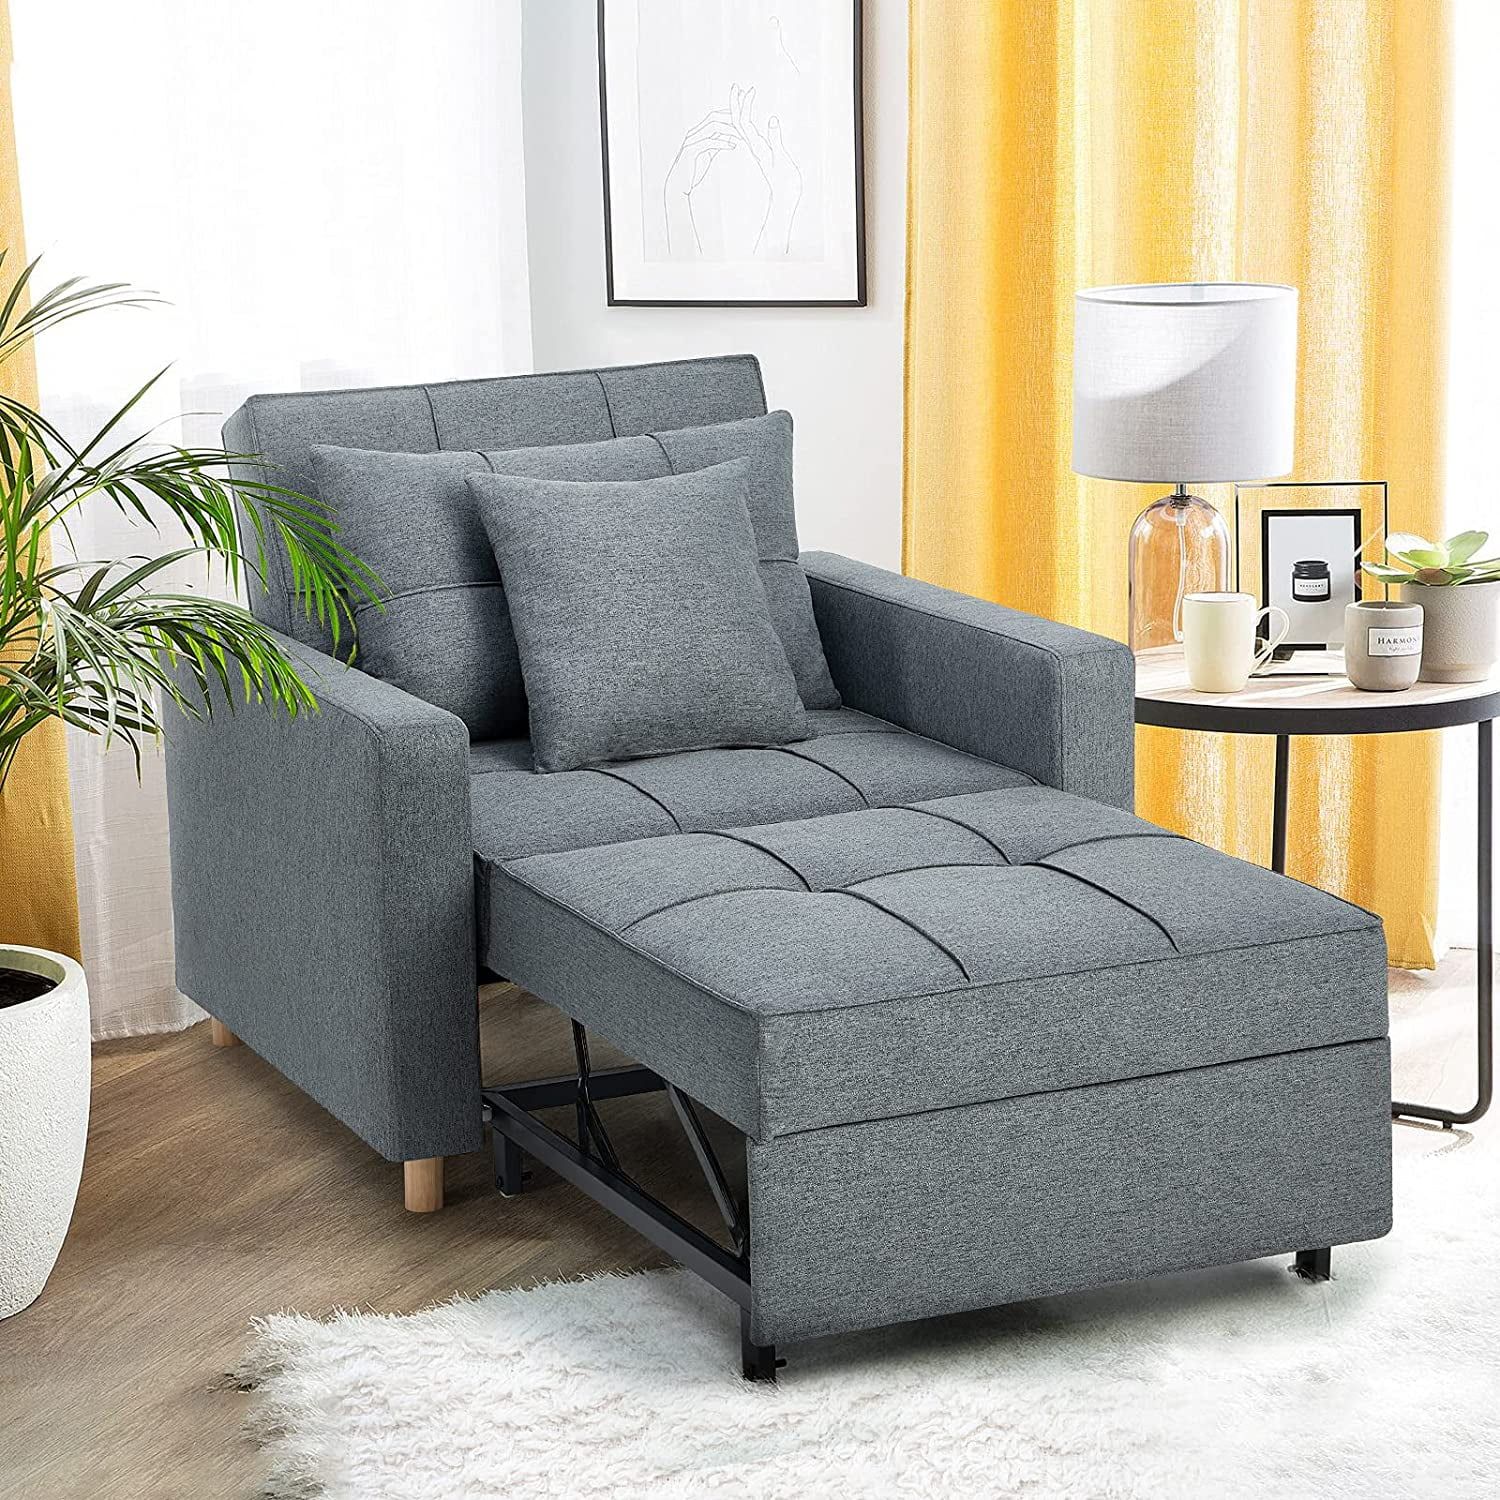 Yodolla 3 In 1 Futon Sofa Bed Chair With Adjustable Backrest Into A With Regard To 3 In 1 Gray Pull Out Sleeper Sofas (Gallery 1 of 20)